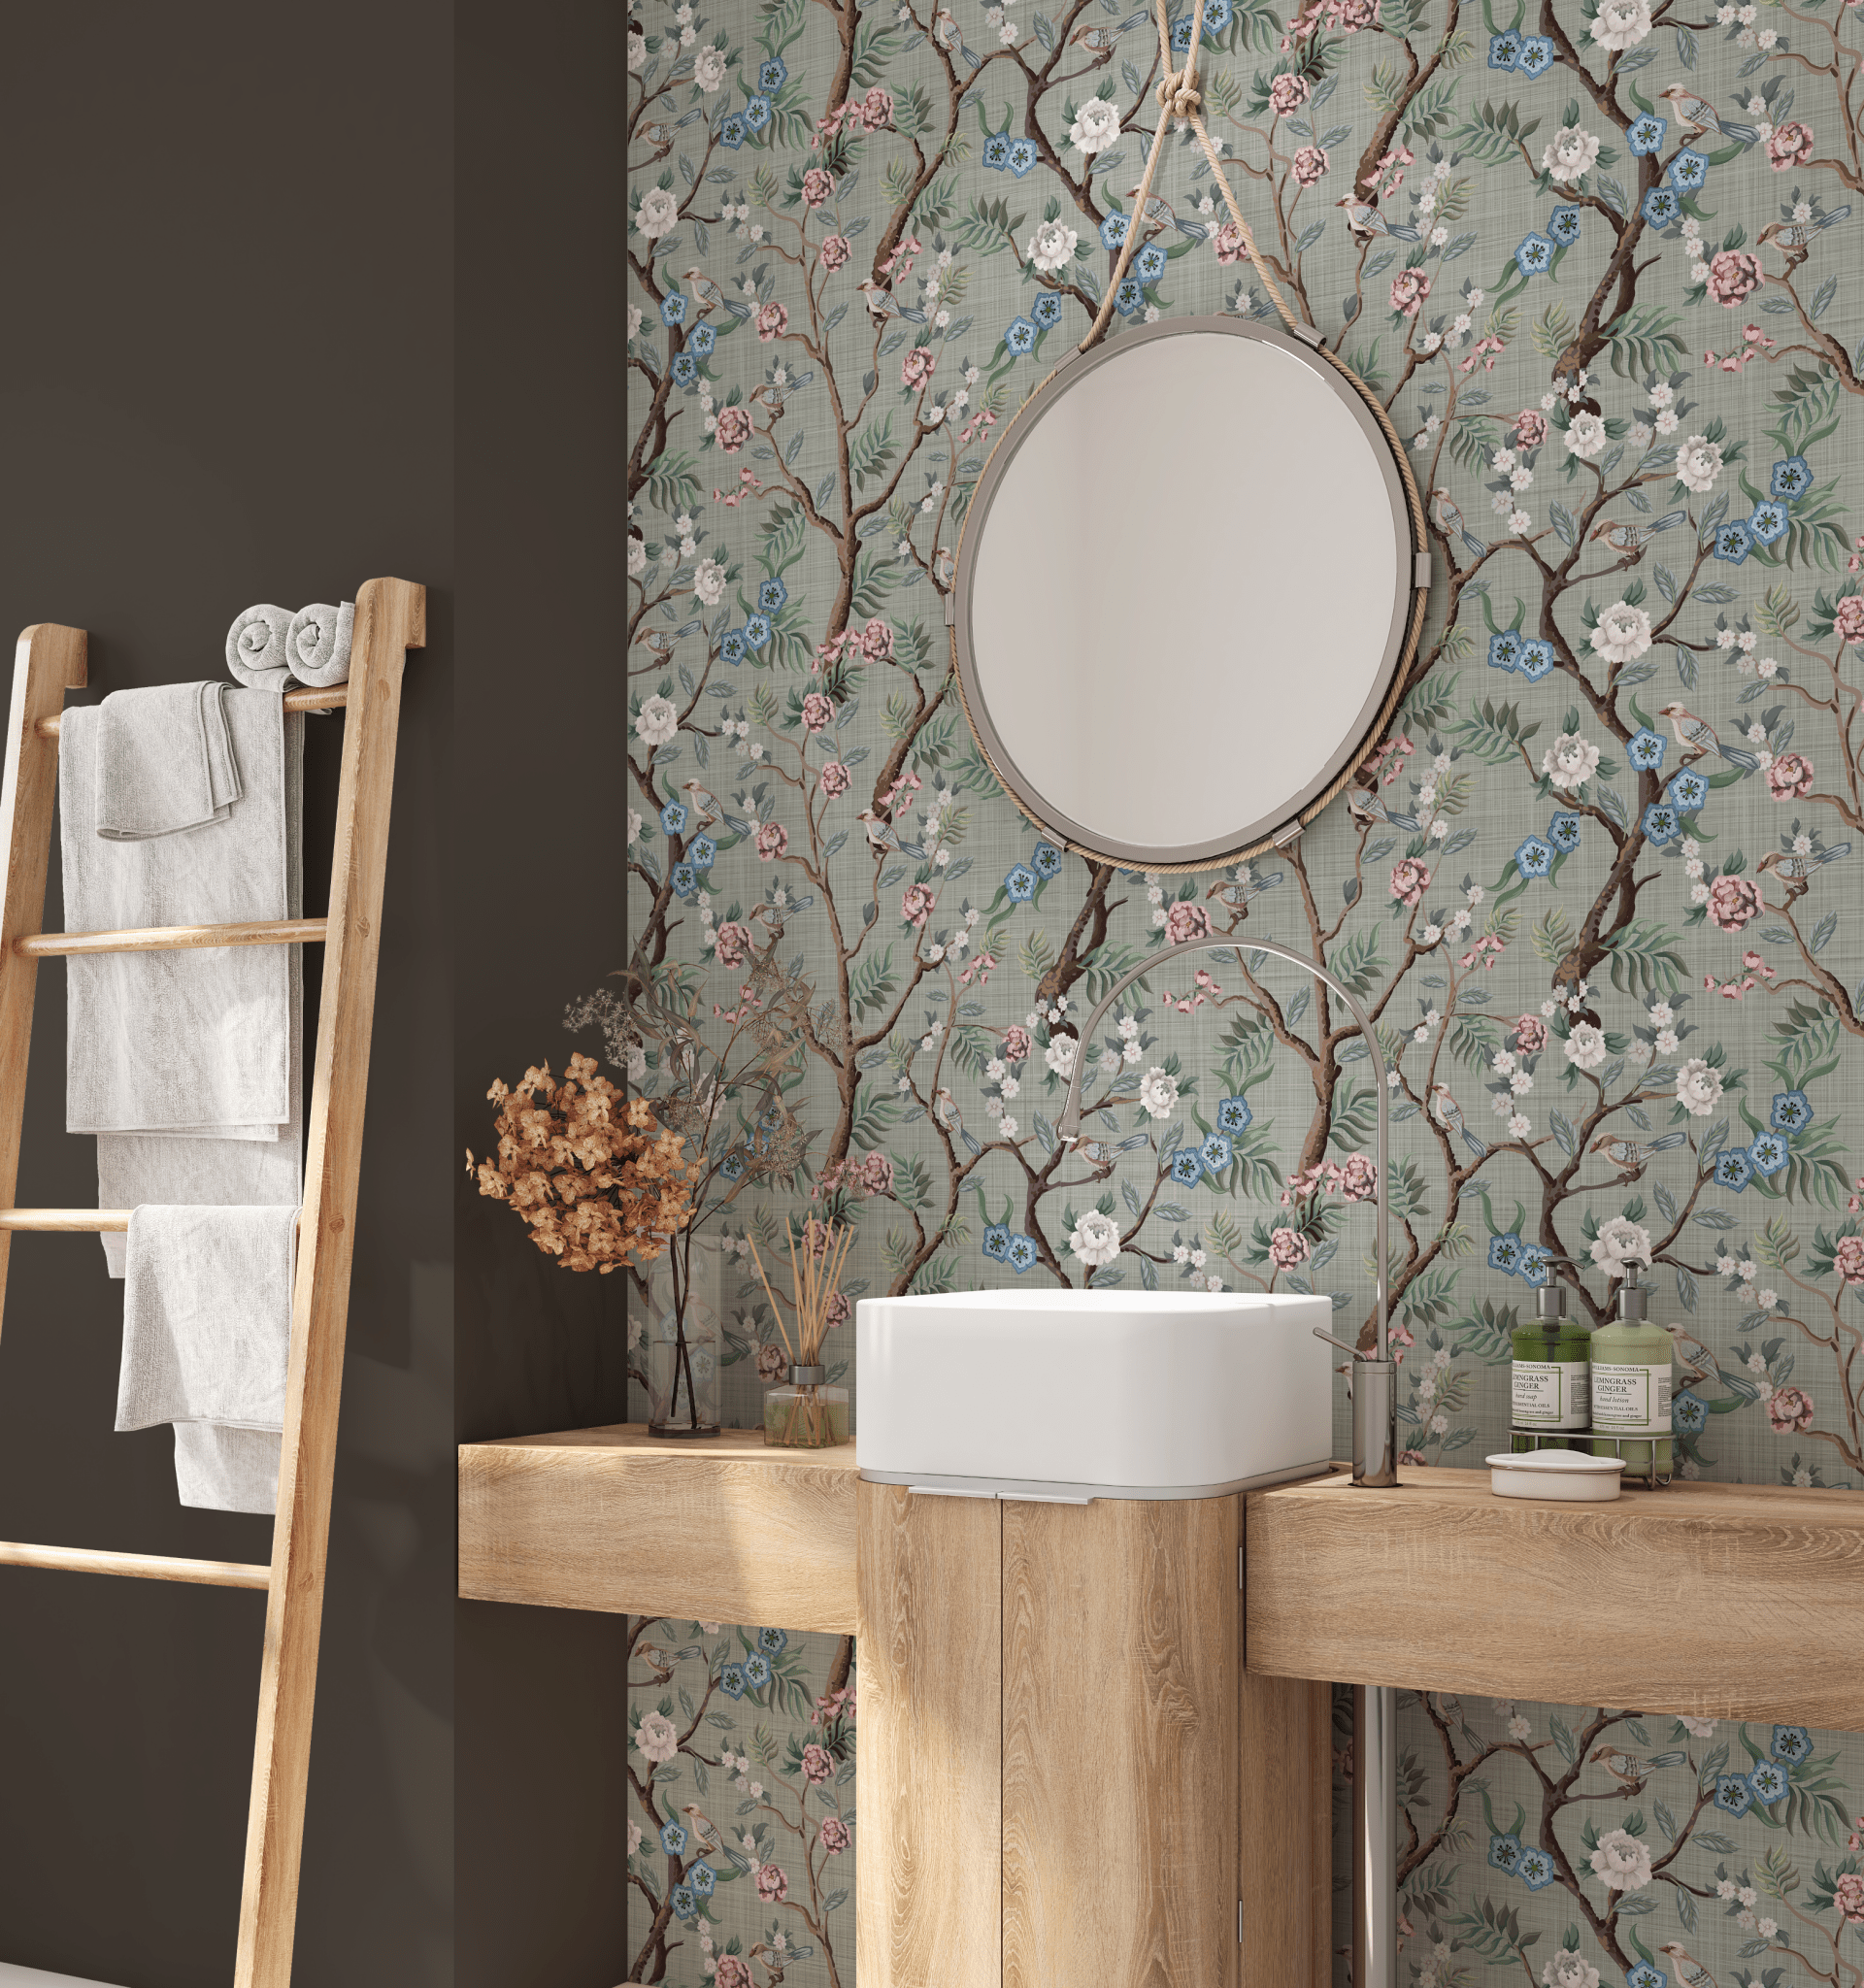 Elegant bathroom featuring peel and stick wallpaper with a classic Chinoiserie design of blossoming branches on a greenish-gray background